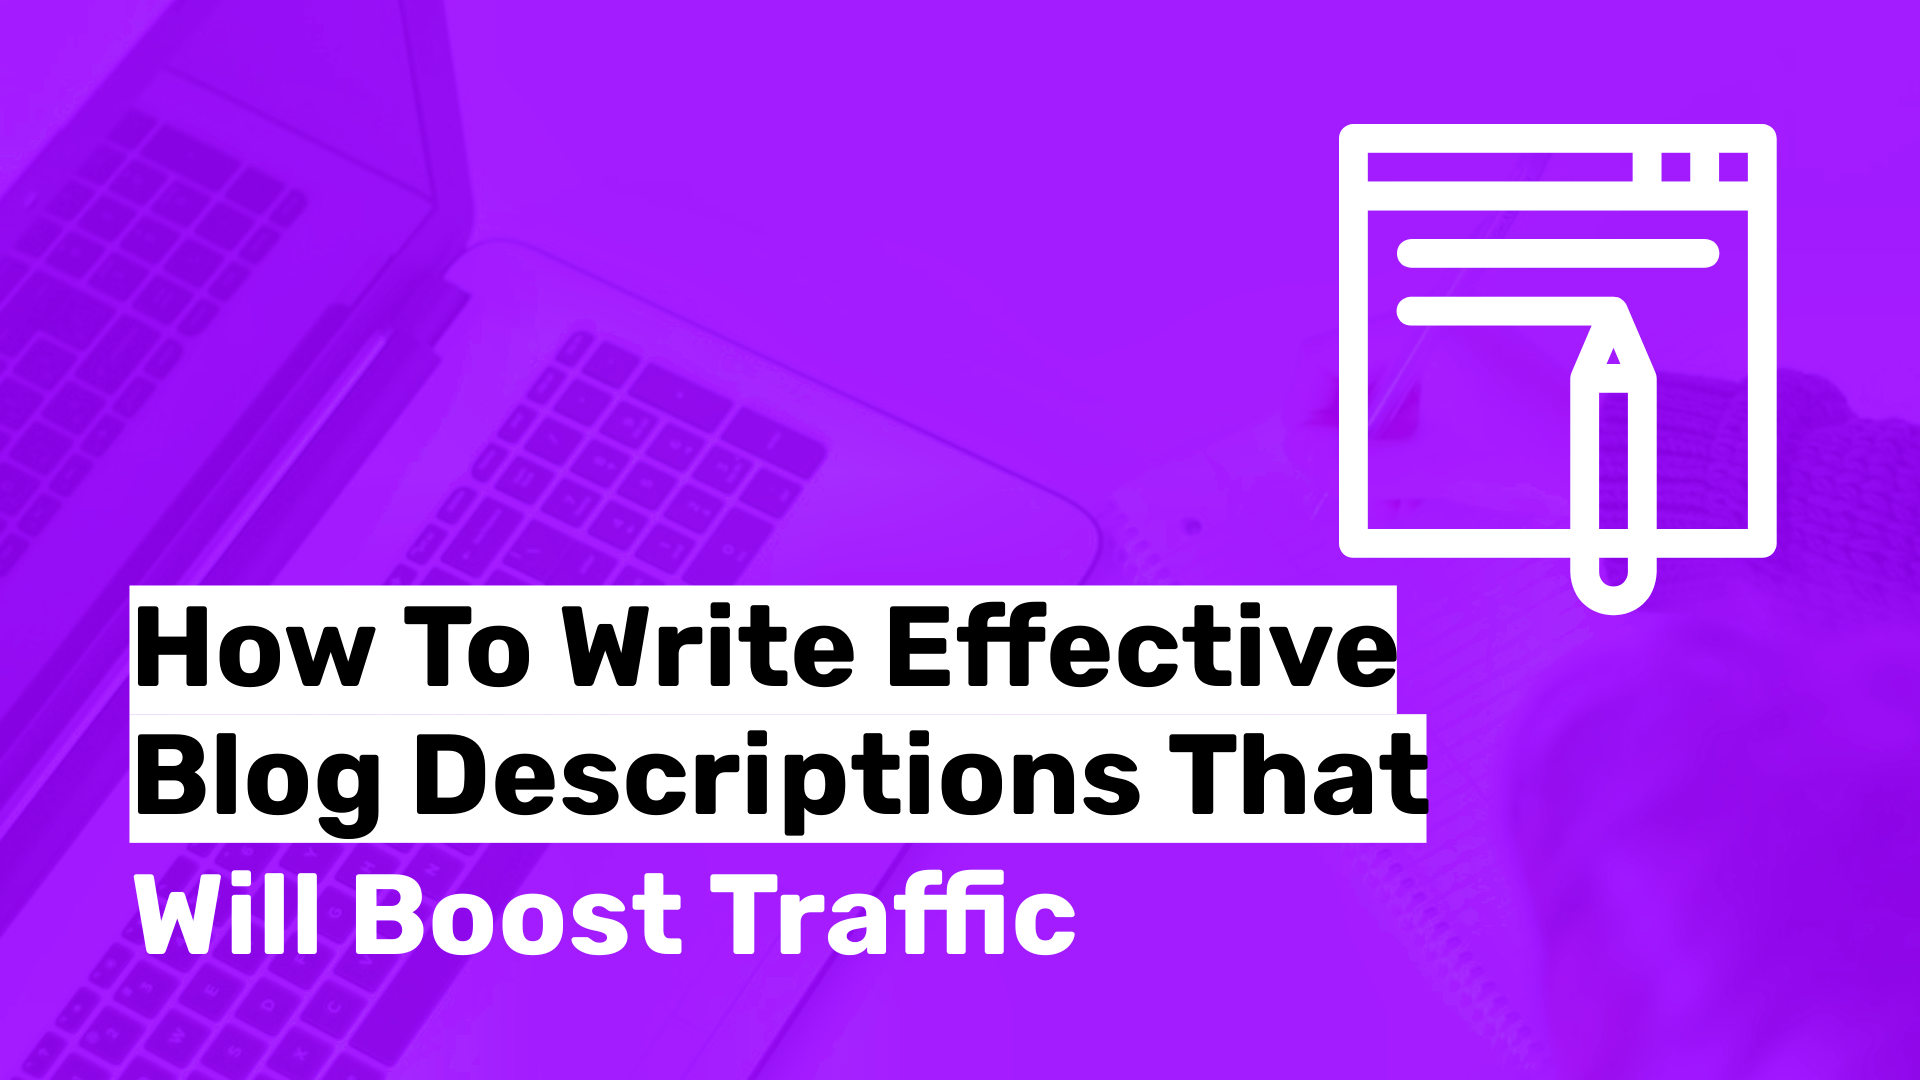 How To Write Effective Blog Descriptions That Will Boost Traffic